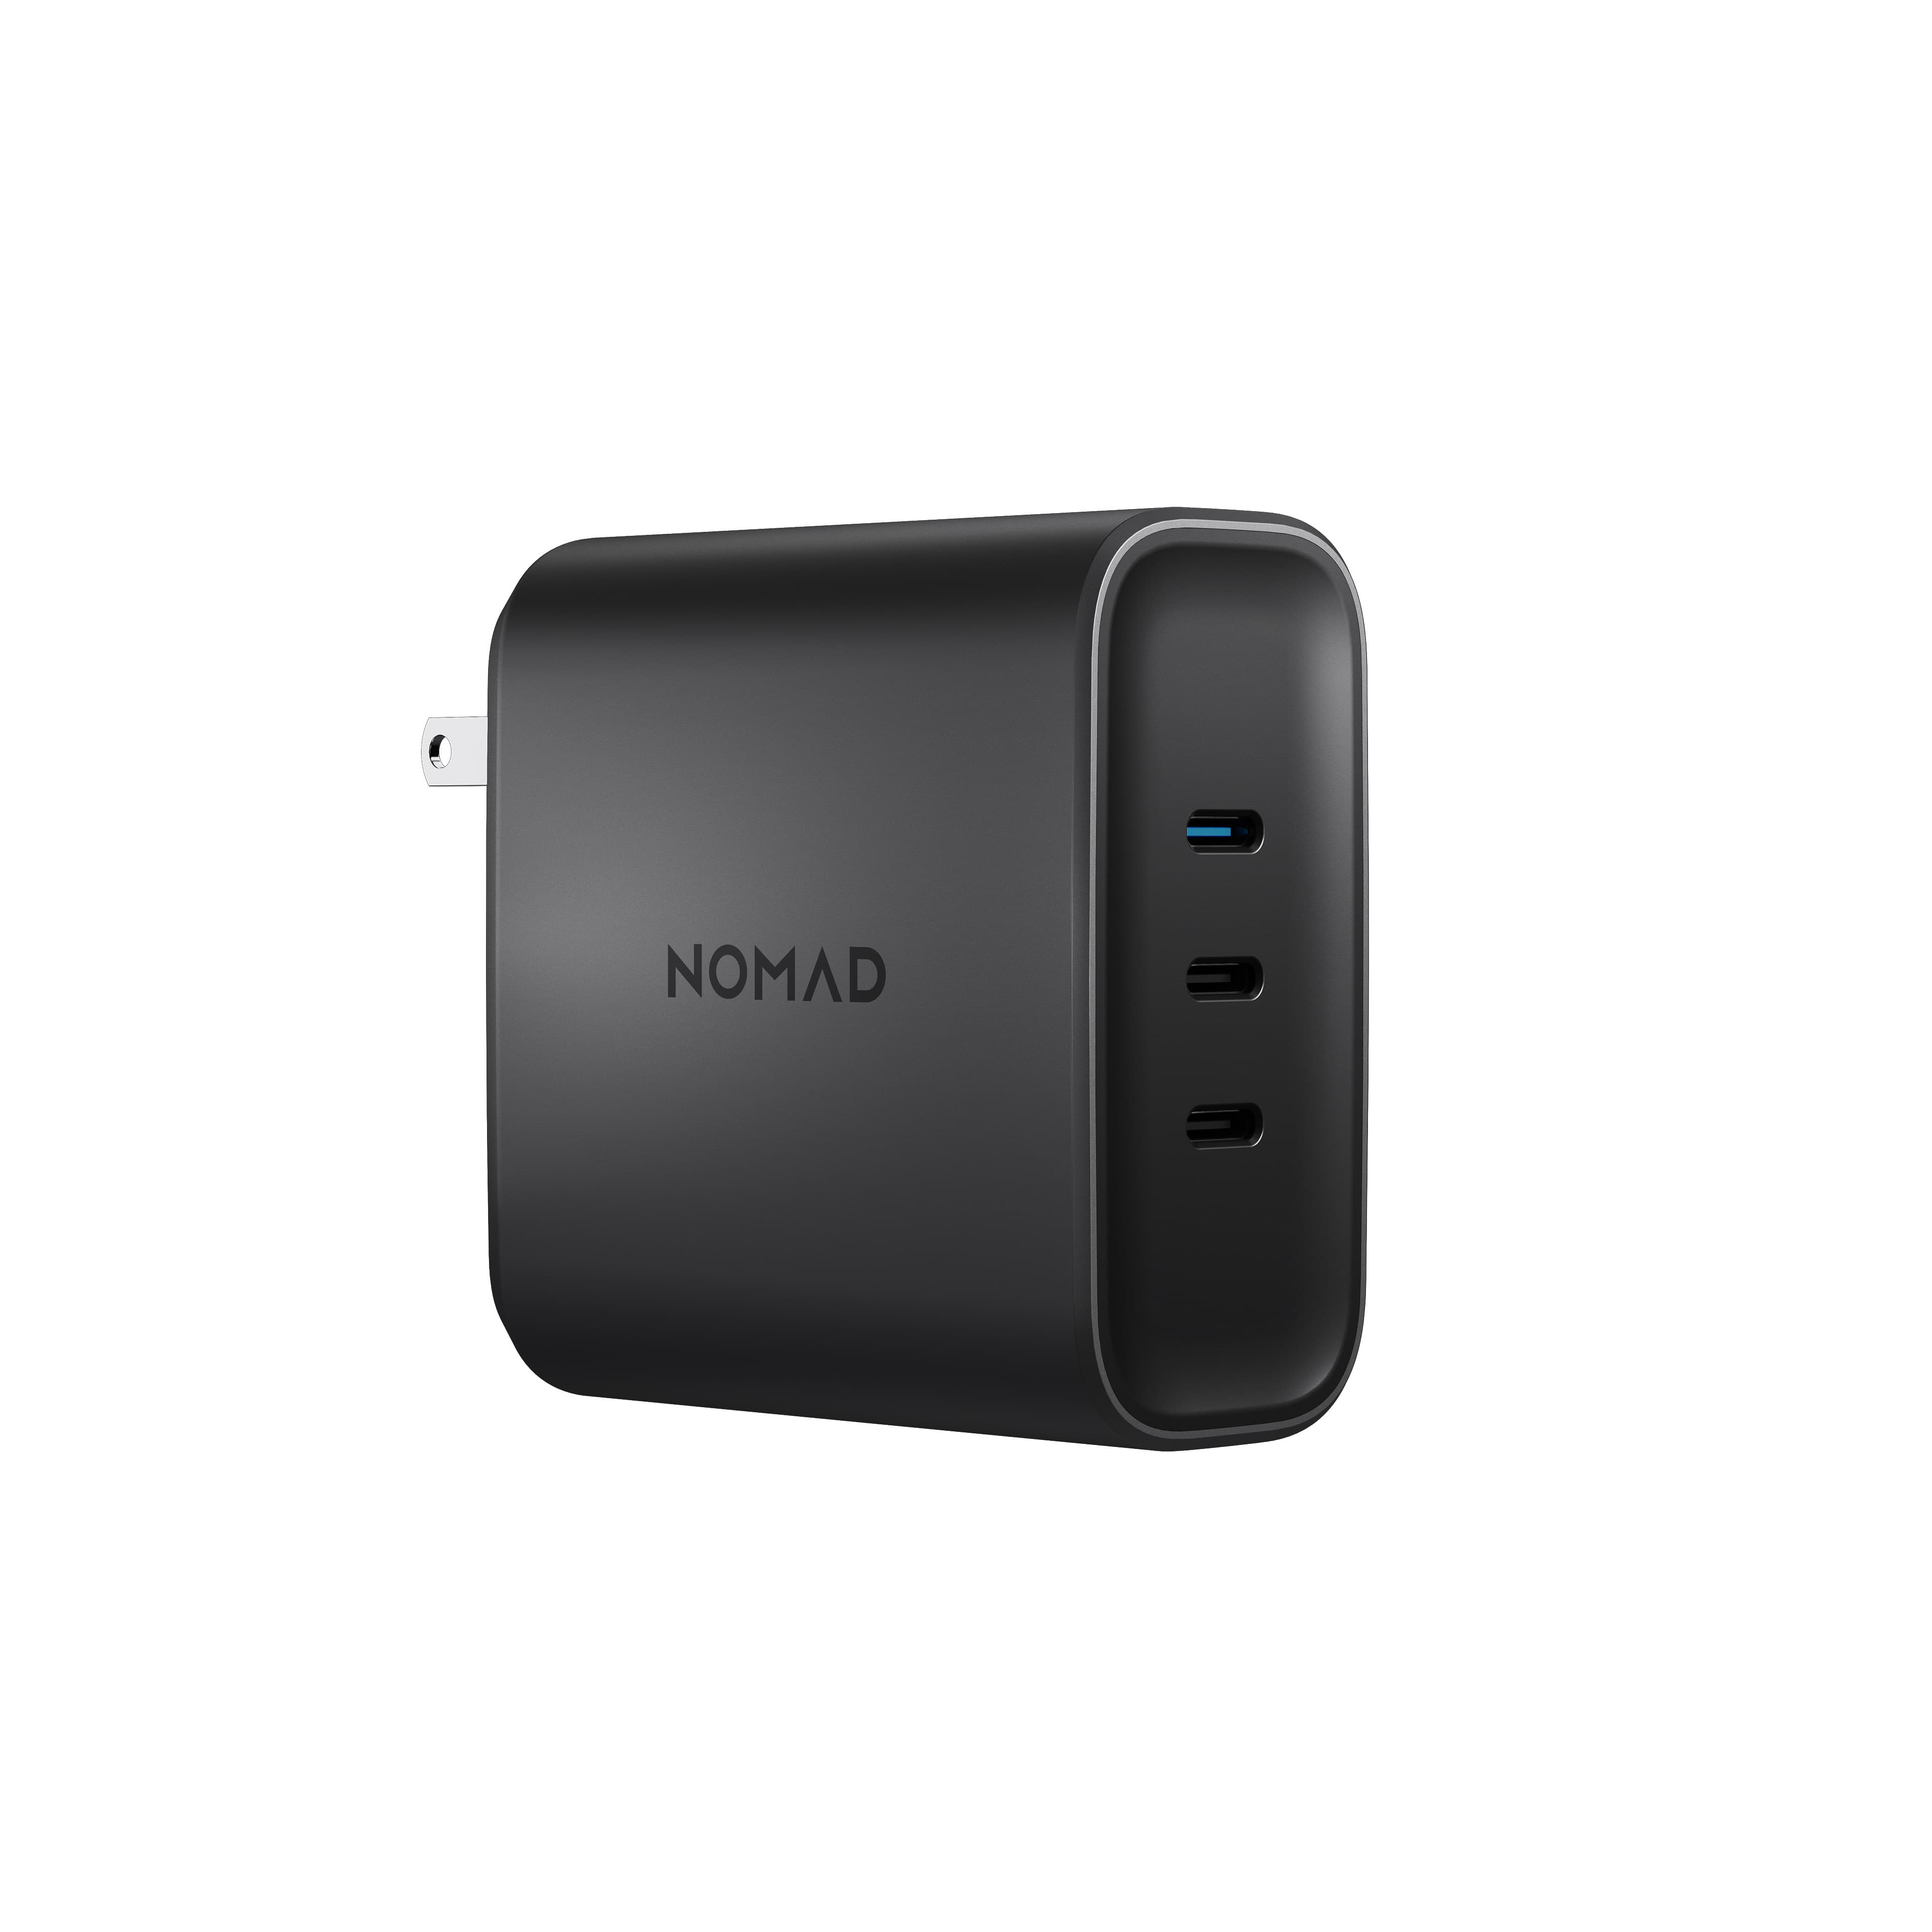 Nomad launches powerful 130W triple-port USB-C power adapter